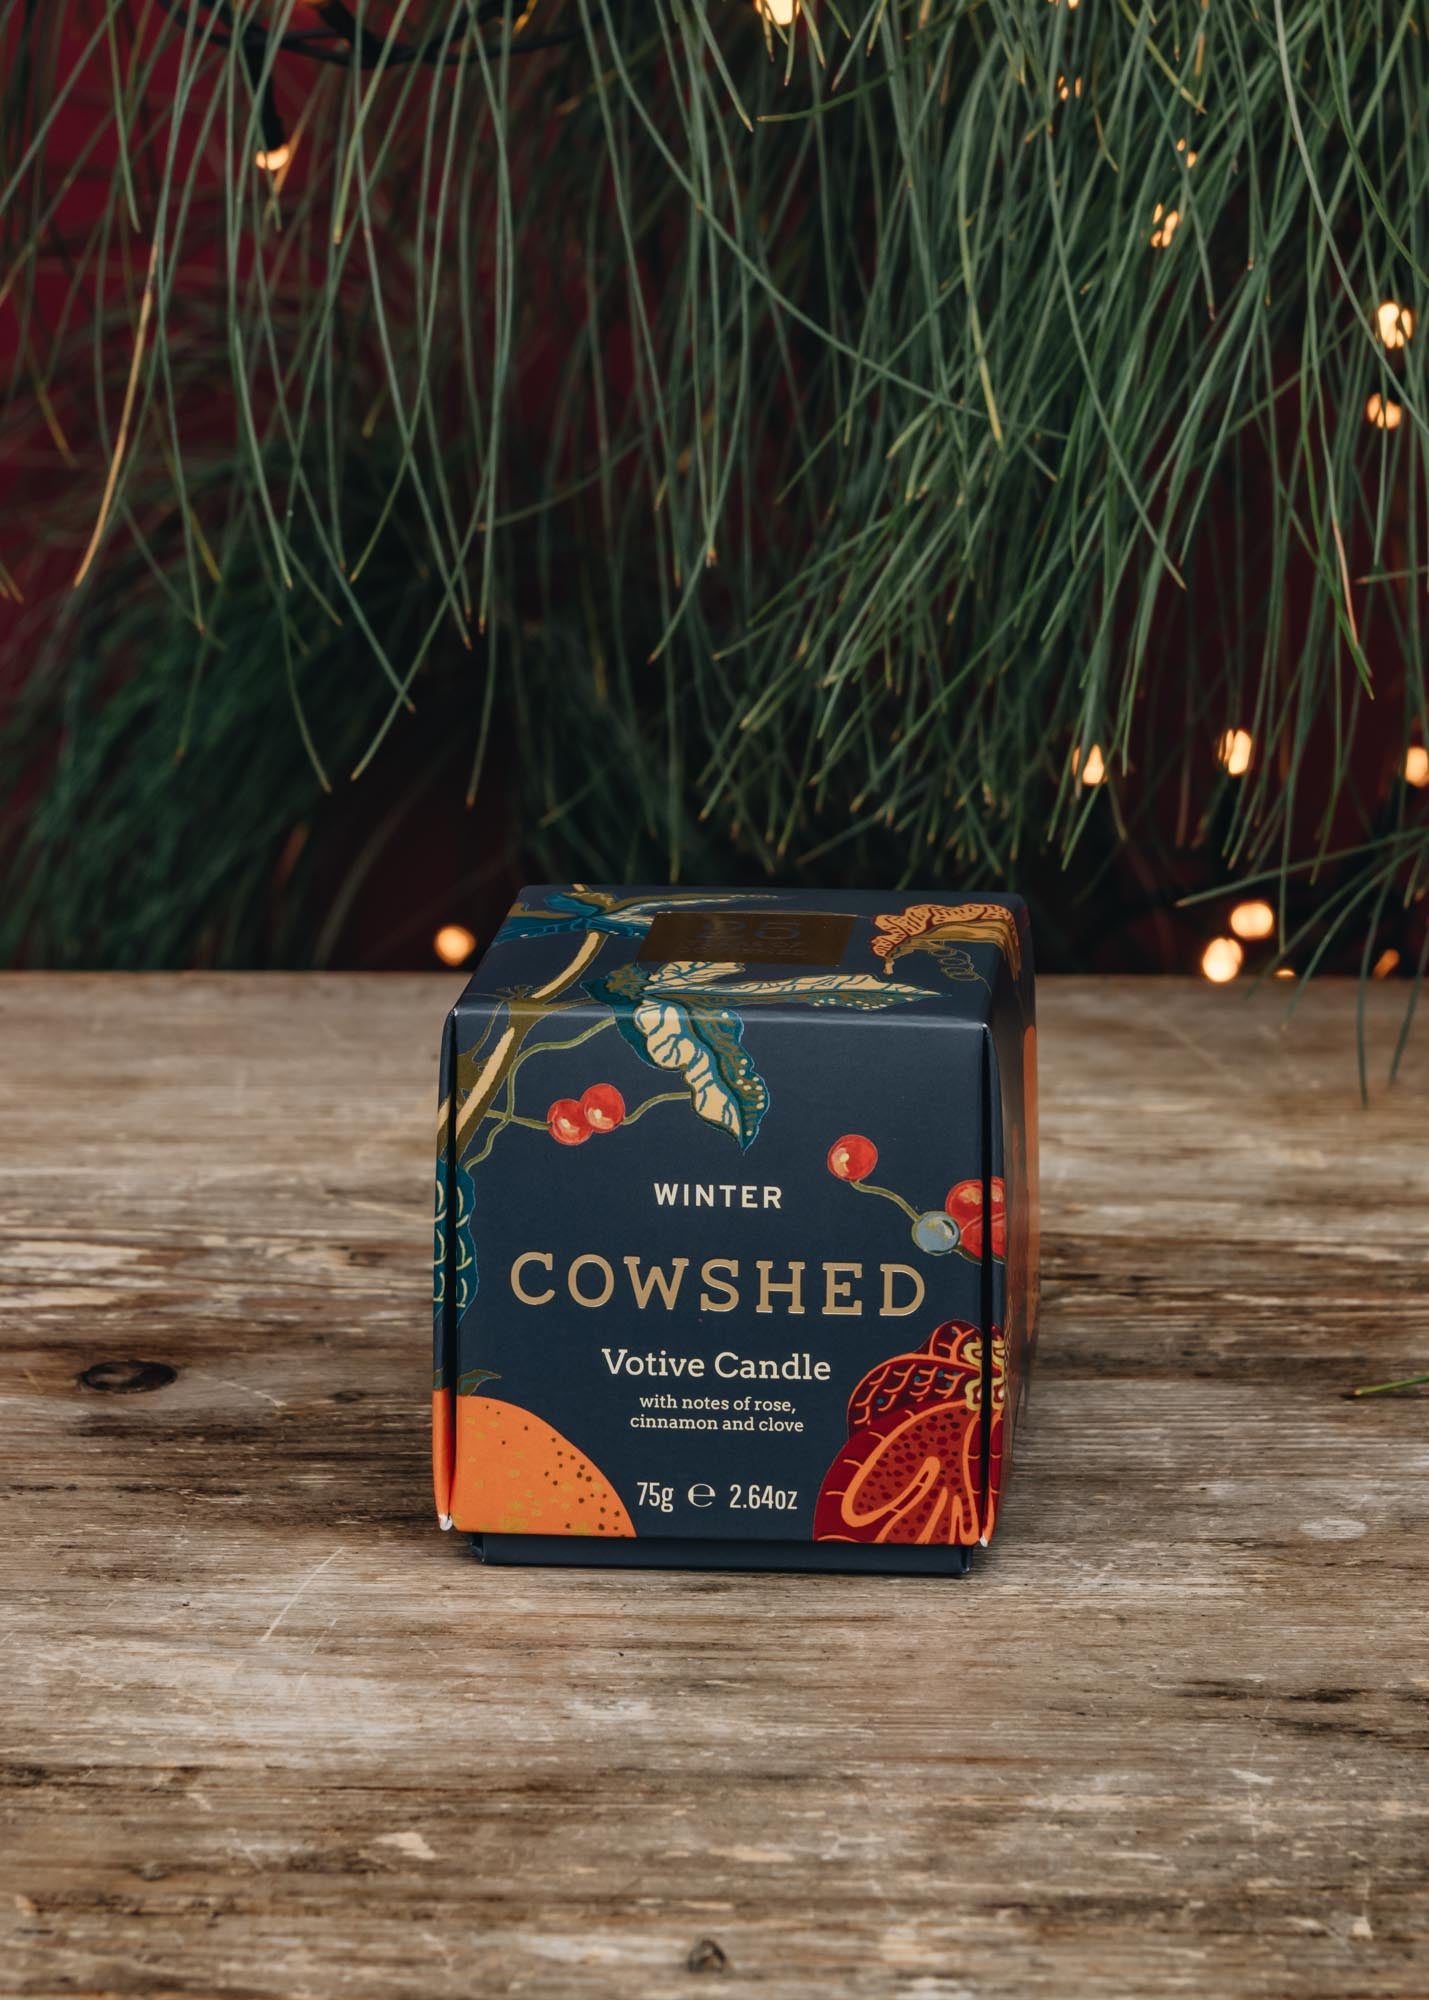 Cowshed Winter Votive Candle, 75g